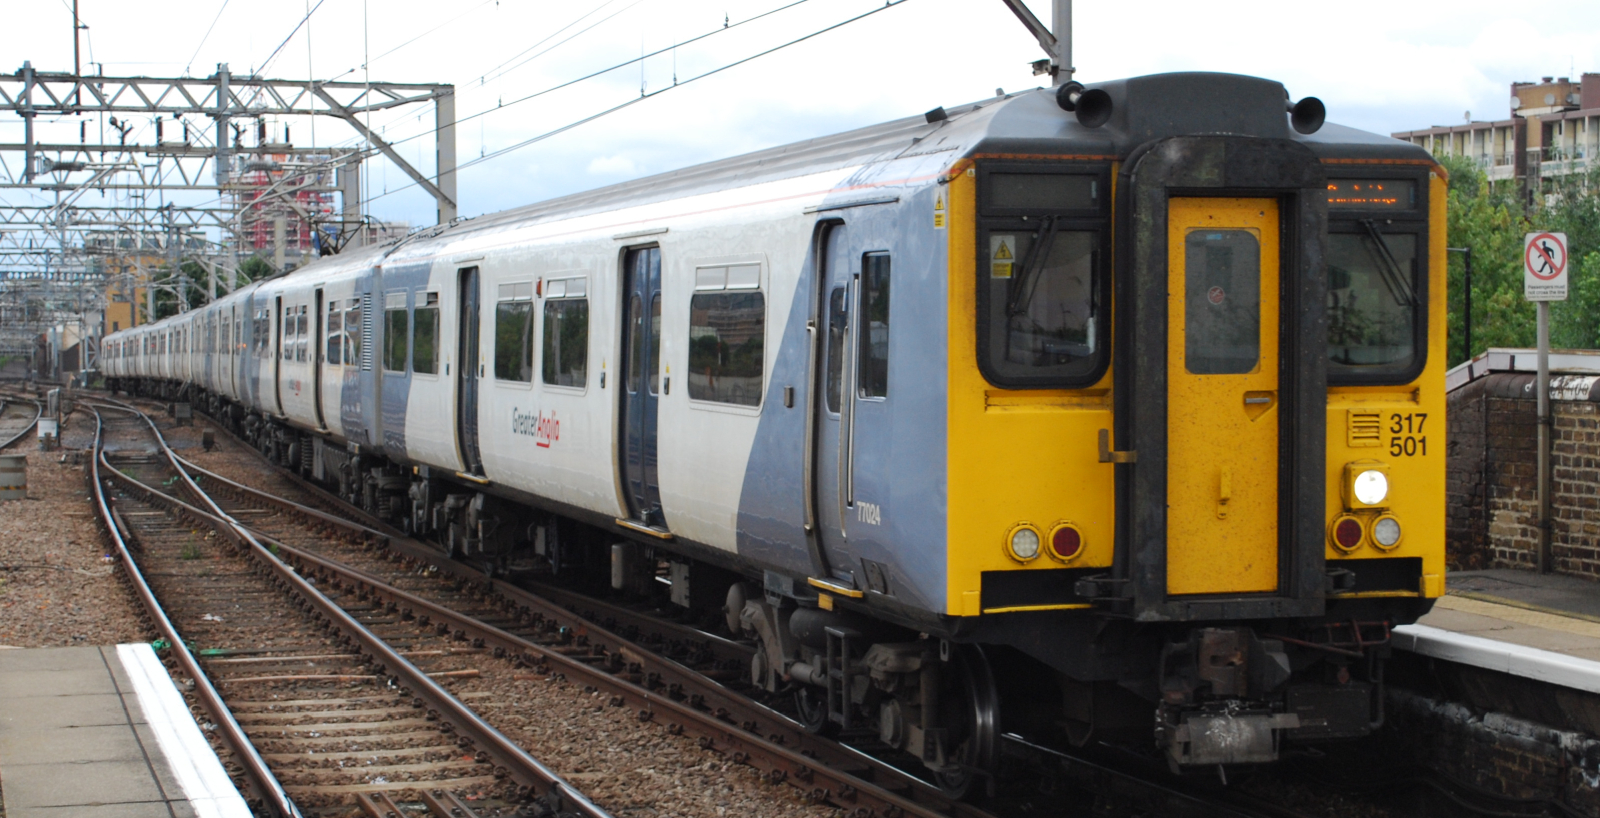 Greater Anglia 317501 in August 2012 at Bethnal Green